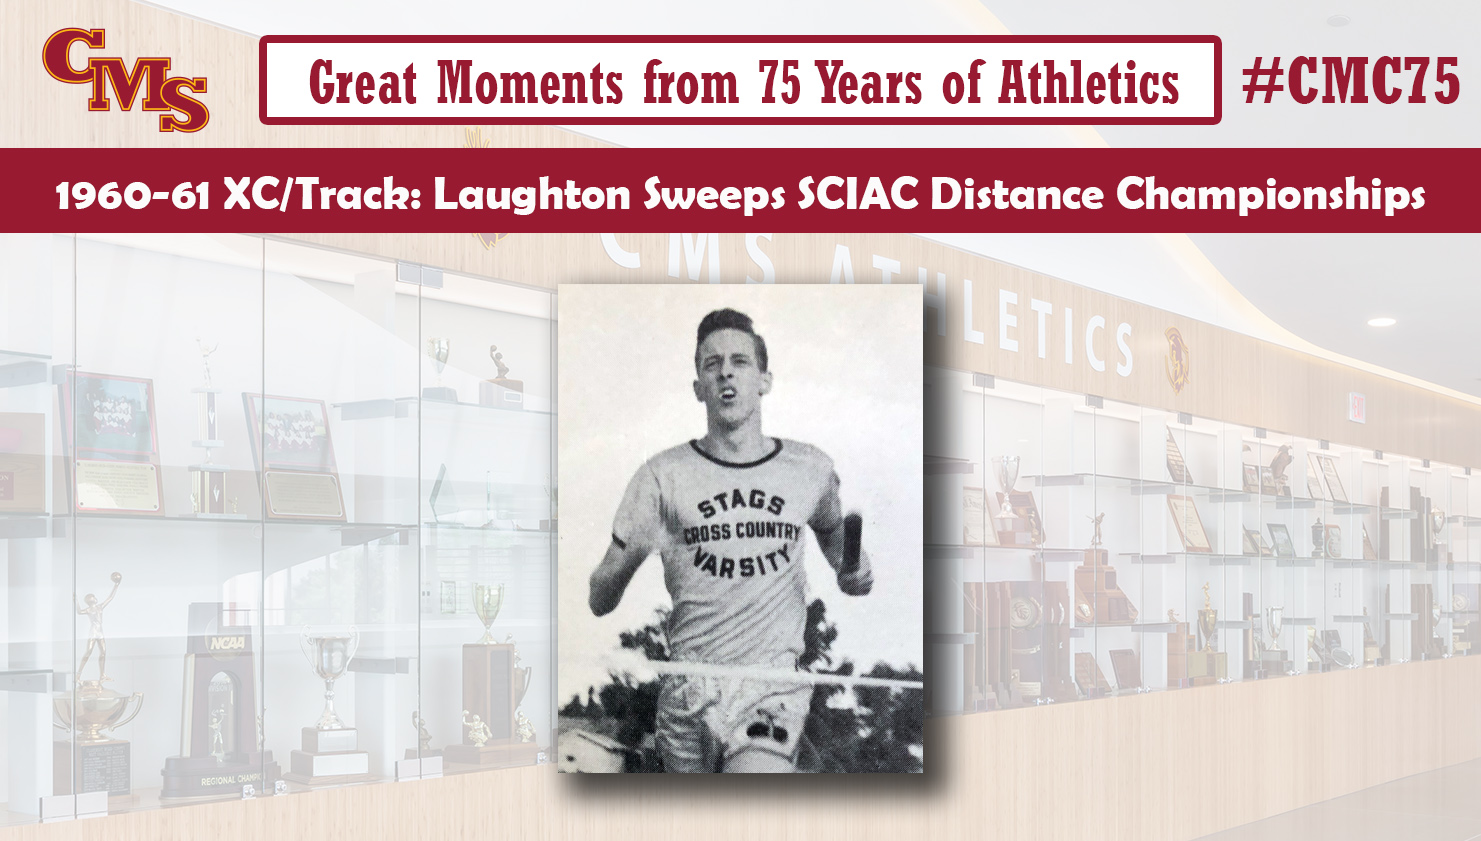 Ed Laughton posing for an action photo. Words over the text read: Great Moments from 75 Years of Athletics, 1960-61 XC/Track: Laughton Sweeps SCIAC Distance Championships